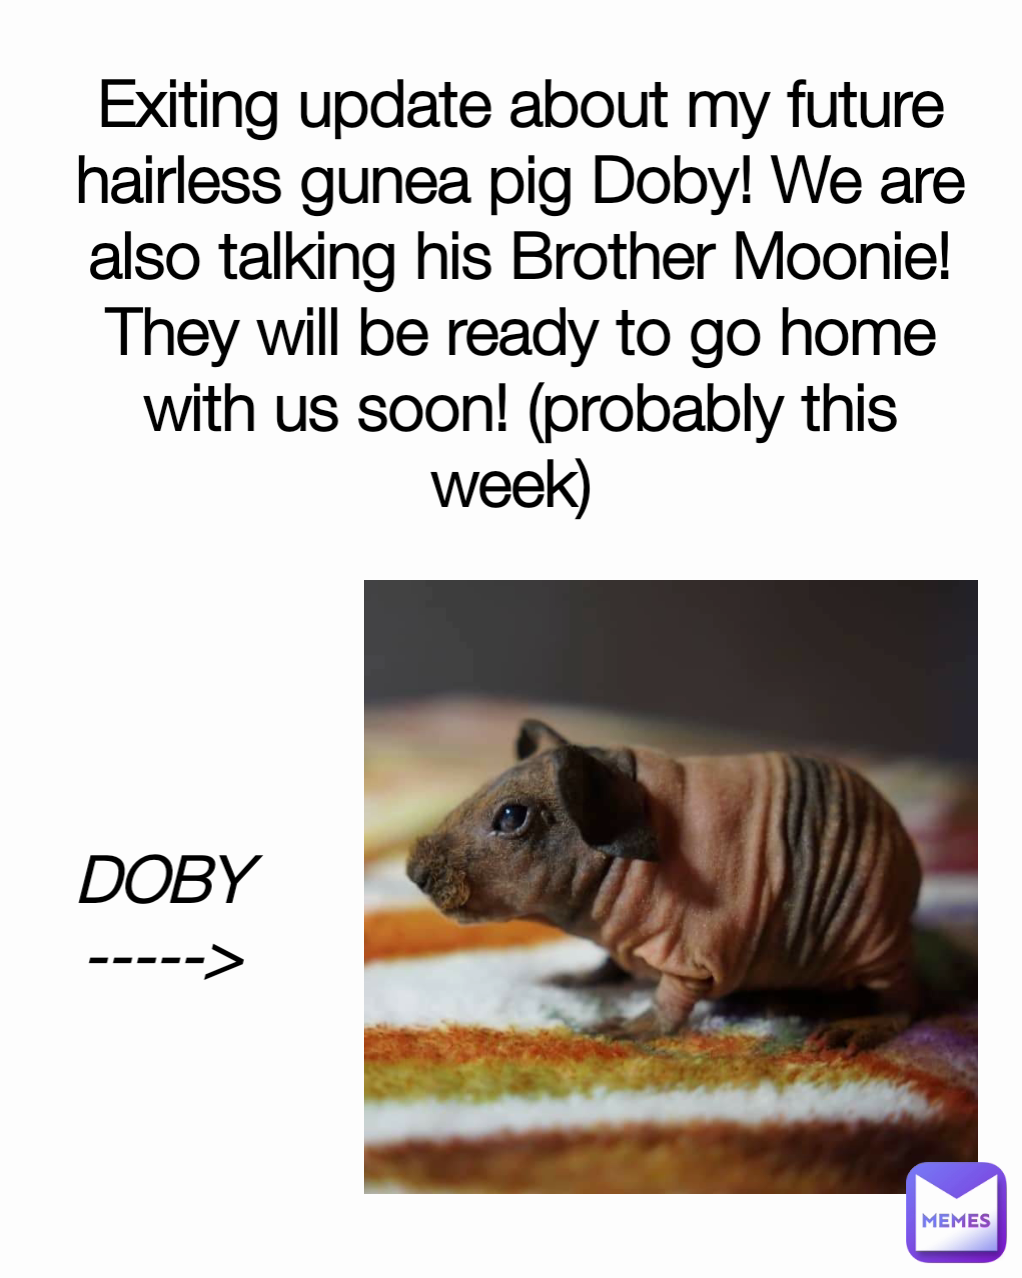 DOBY -----> Exiting update about my future hairless gunea pig Doby! We are also talking his Brother Moonie! They will be ready to go home with us soon! (probably this week) 